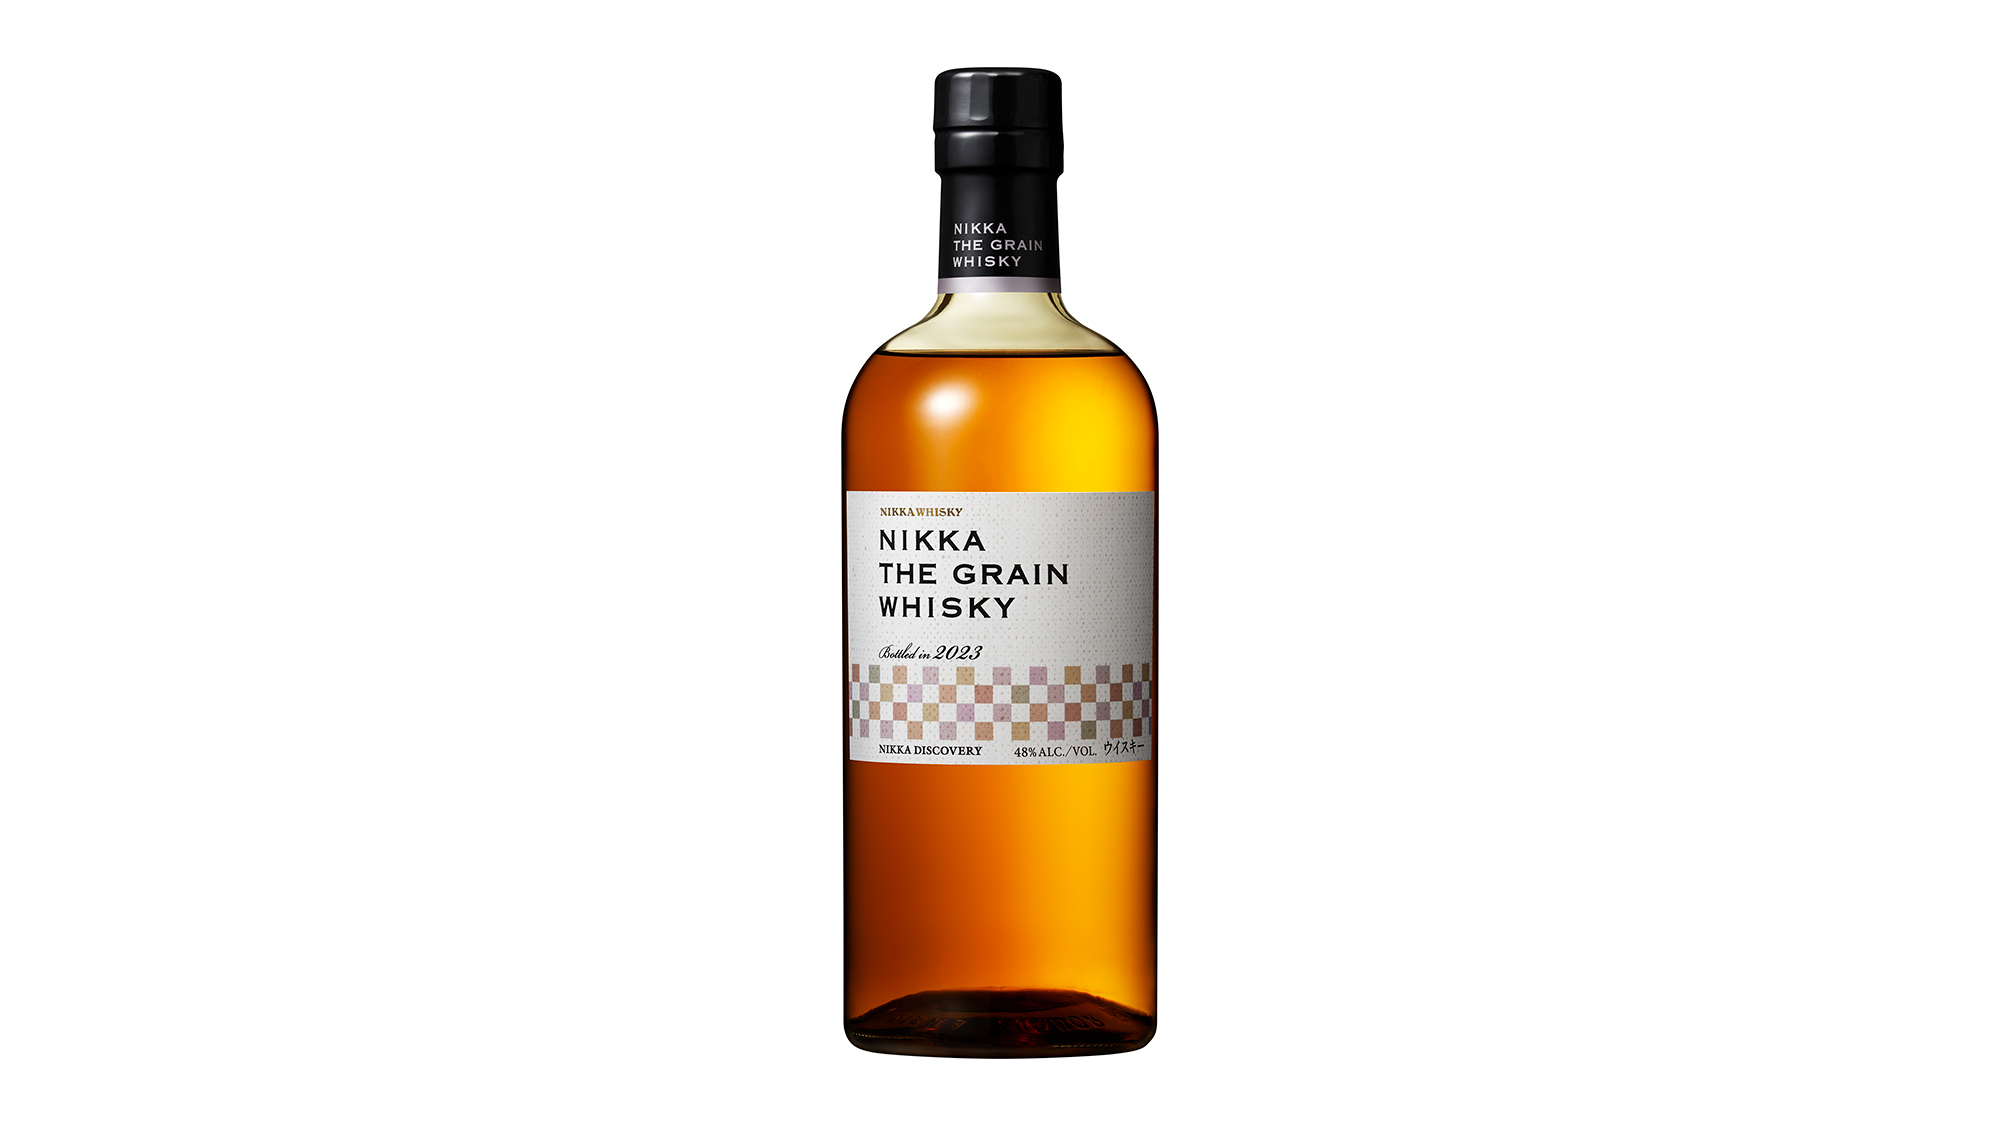 Nikka Debuts The Final Installment Of Discovery Series, Nikka The Grain Whisky